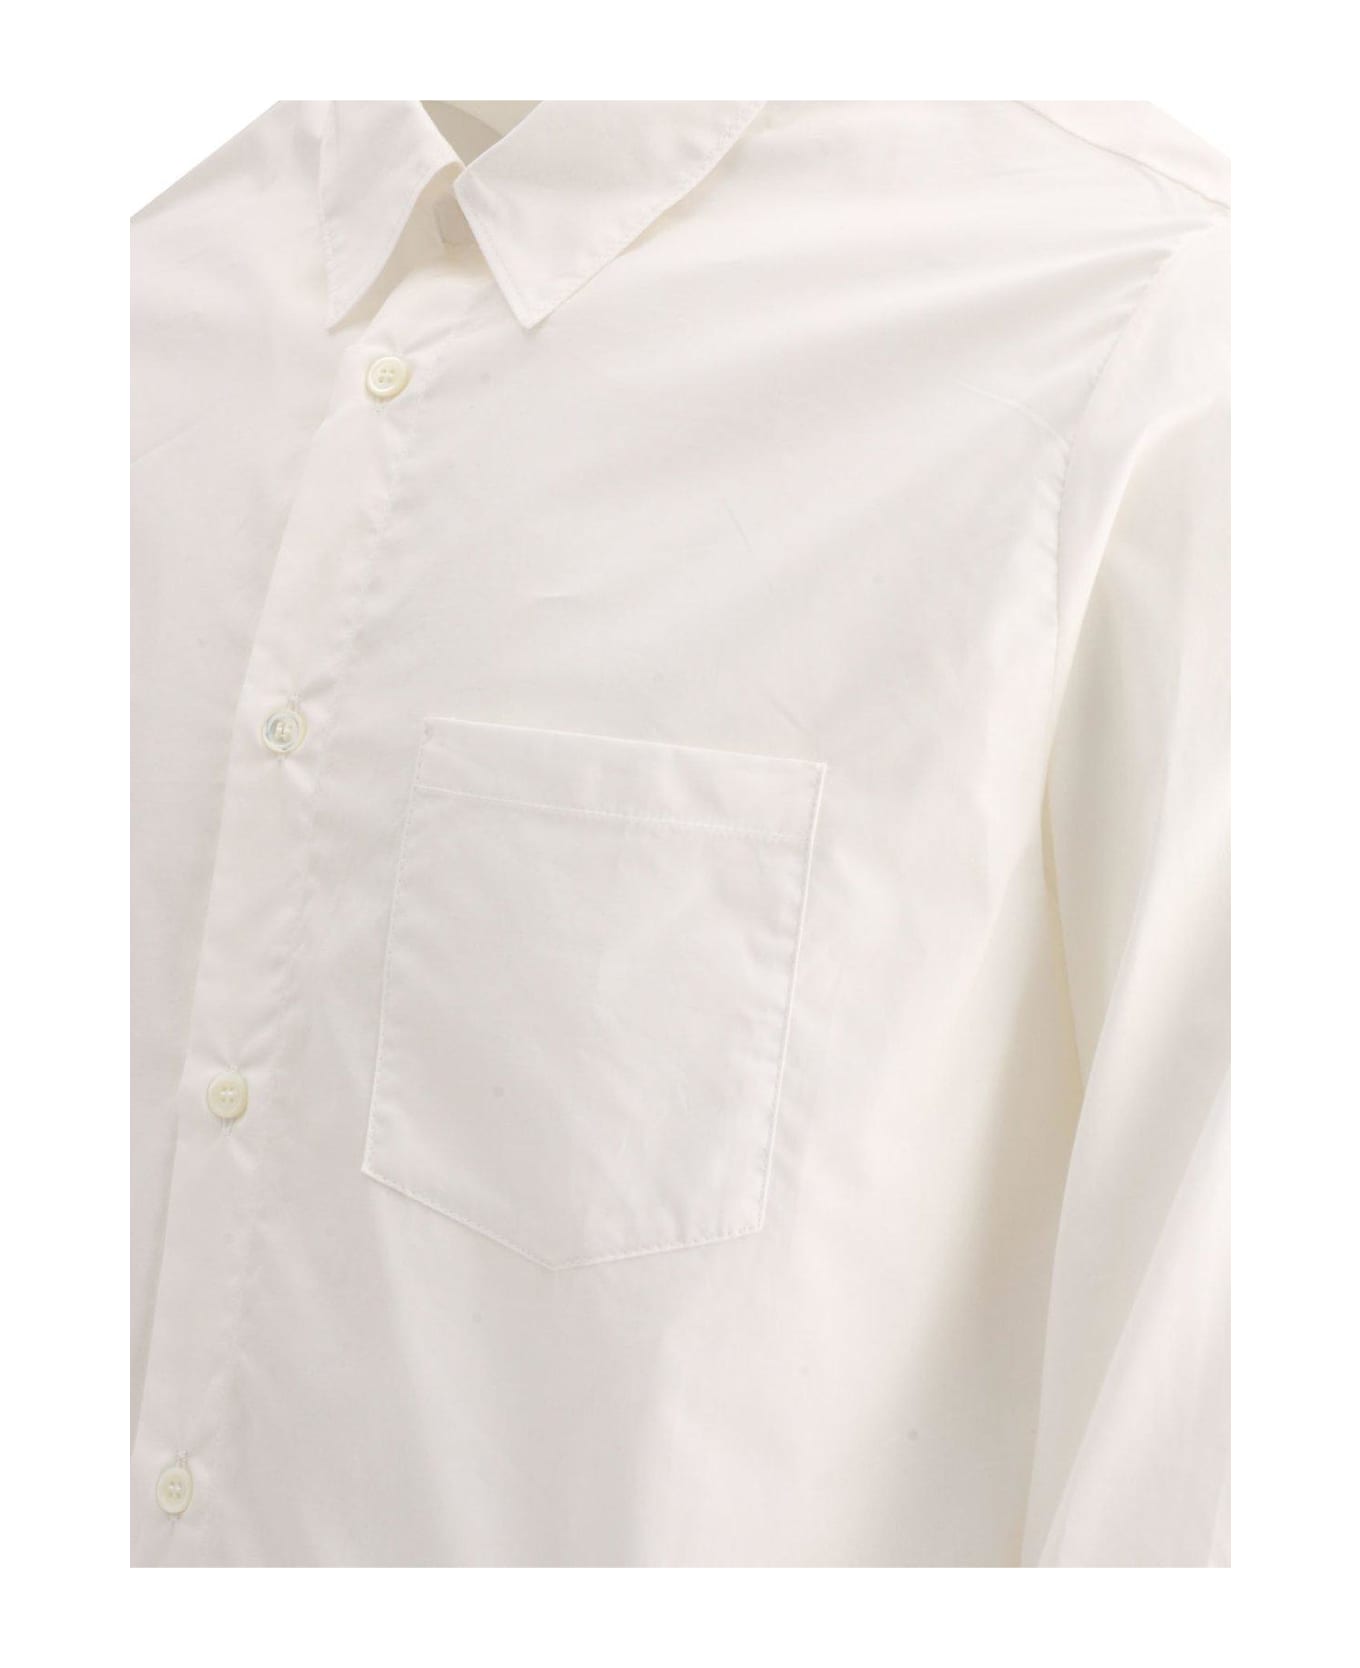 A.P.C. Buttoned Long-sleeved Shirt - Aab White シャツ